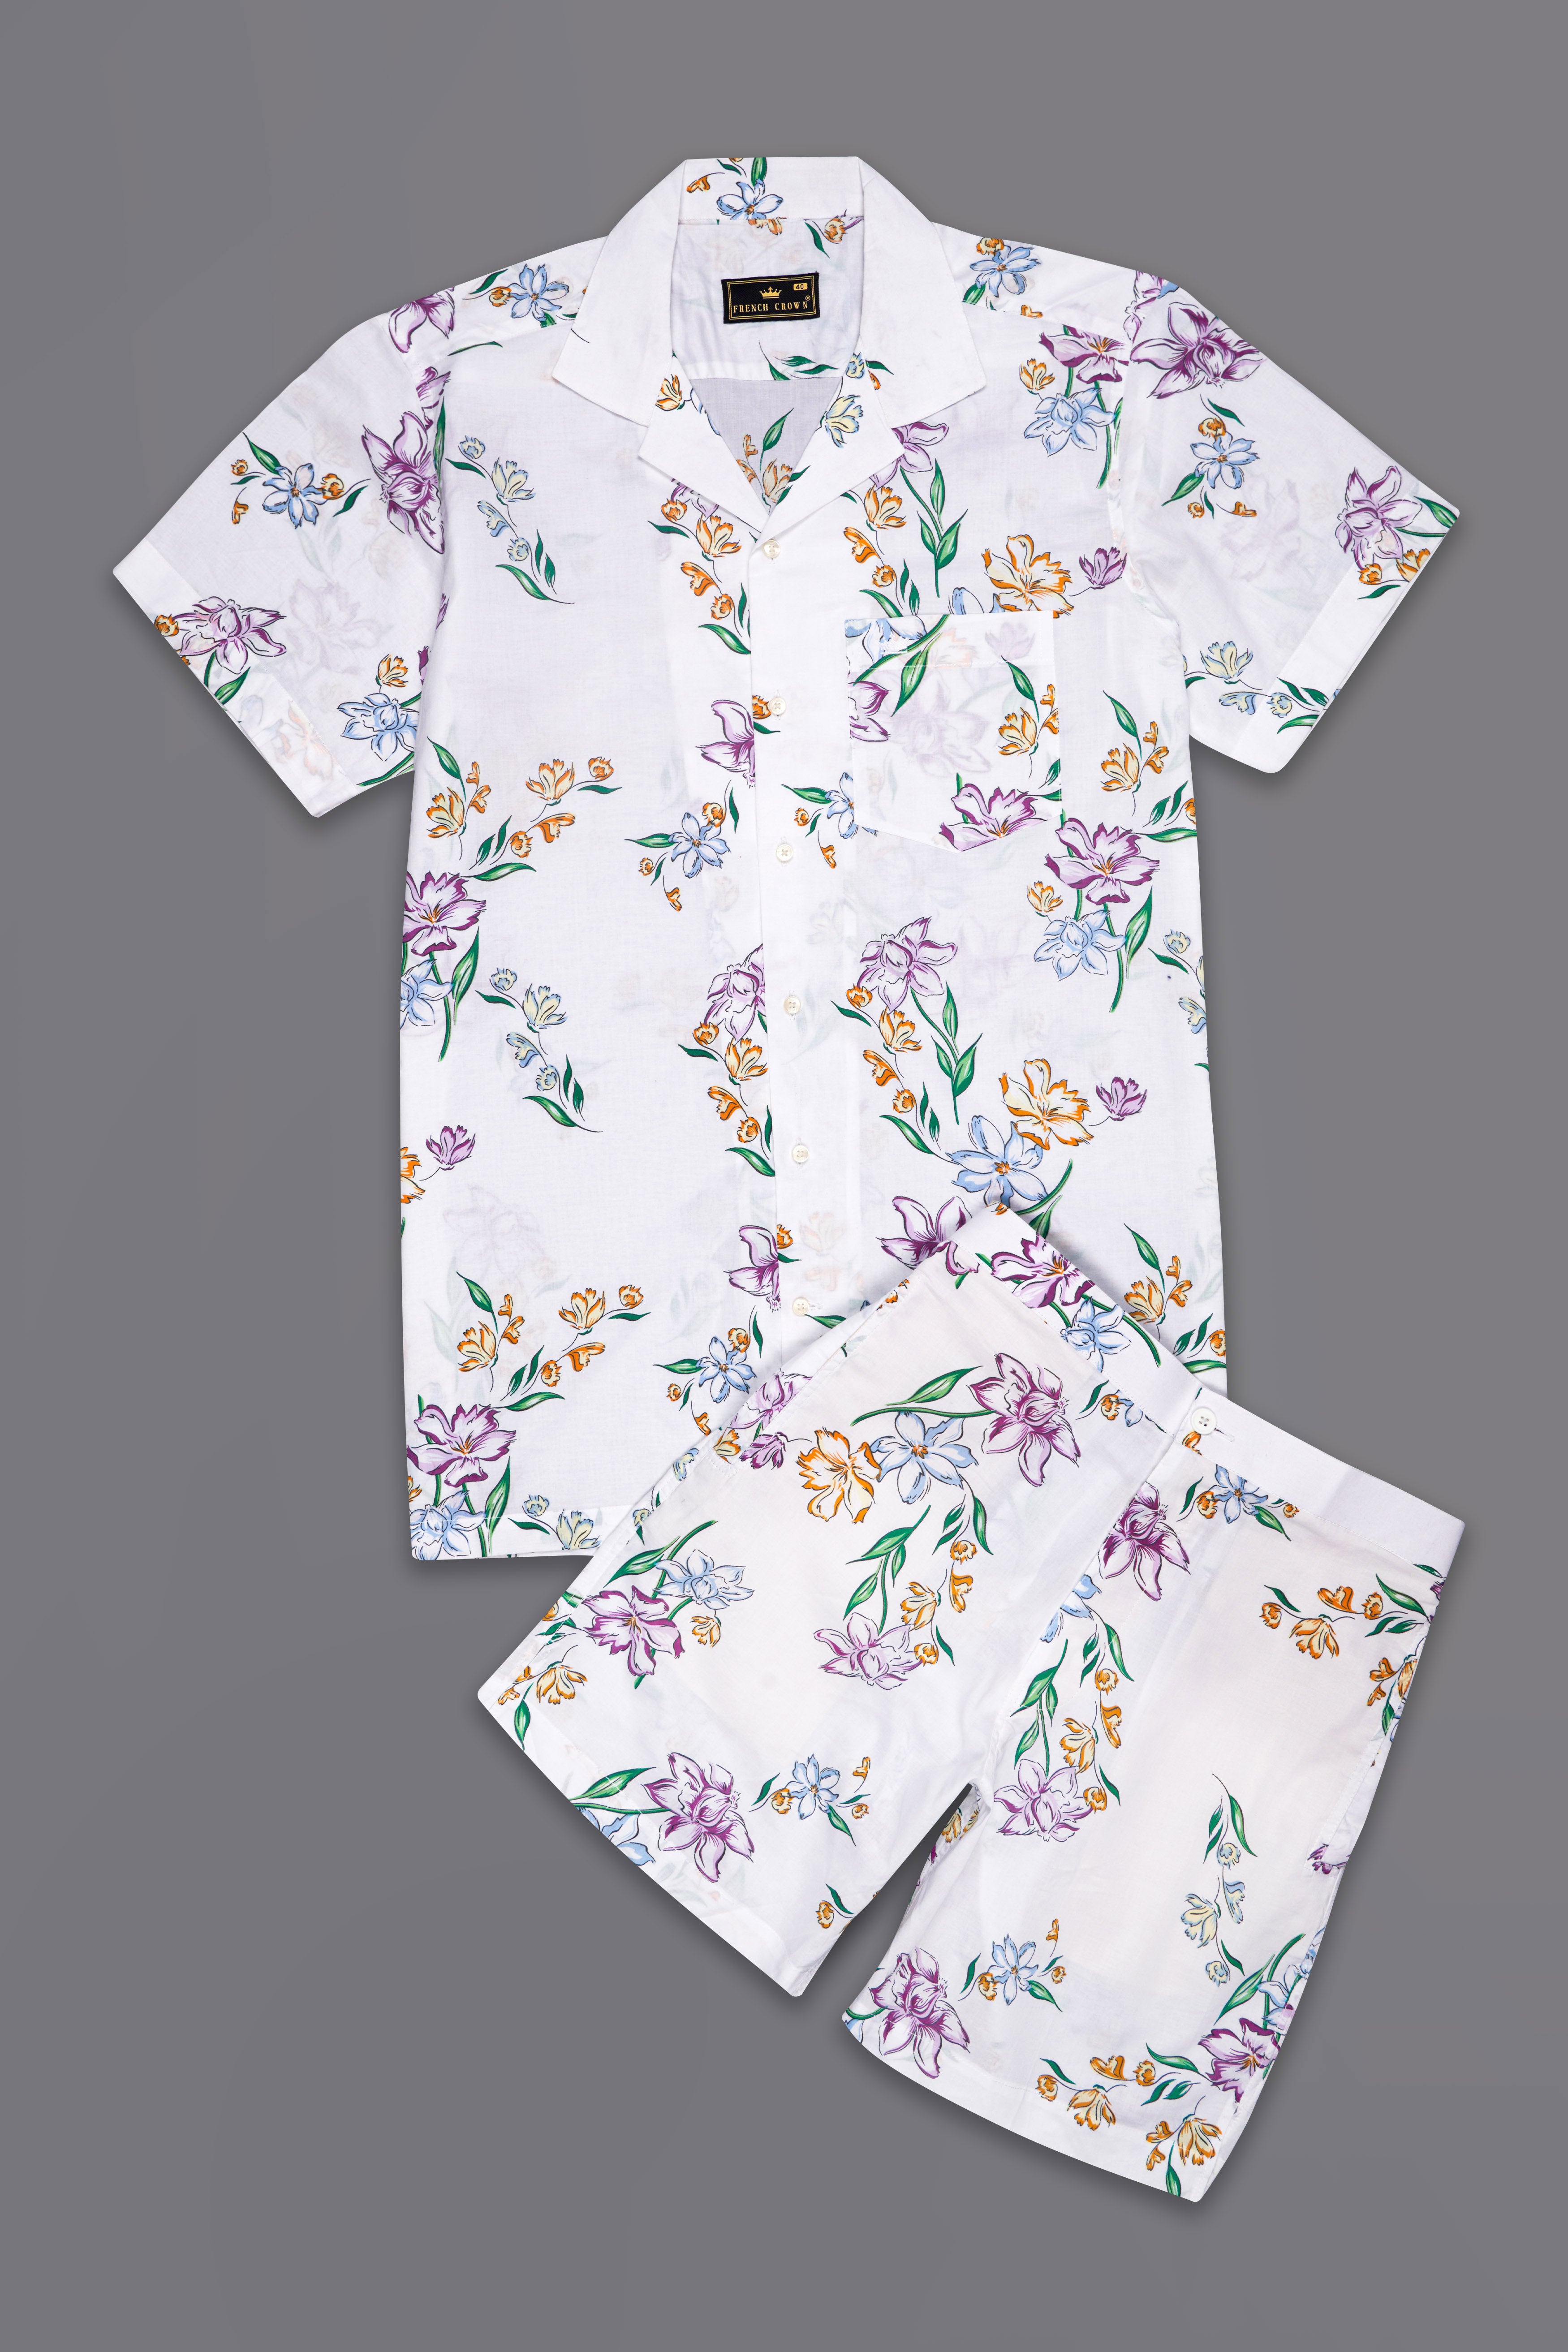 Bright White Floral Printed Light Weight Premium Cotton Co-ord Sets 10076-CC-SS-SR268-38, 10076-CC-SS-SR268-39, 10076-CC-SS-SR268-40, 10076-CC-SS-SR268-42, 10076-CC-SS-SR268-44, 10076-CC-SS-SR268-46, 10076-CC-SS-SR268-48, 10076-CC-SS-SR268-50, 10076-CC-SS-SR268-52